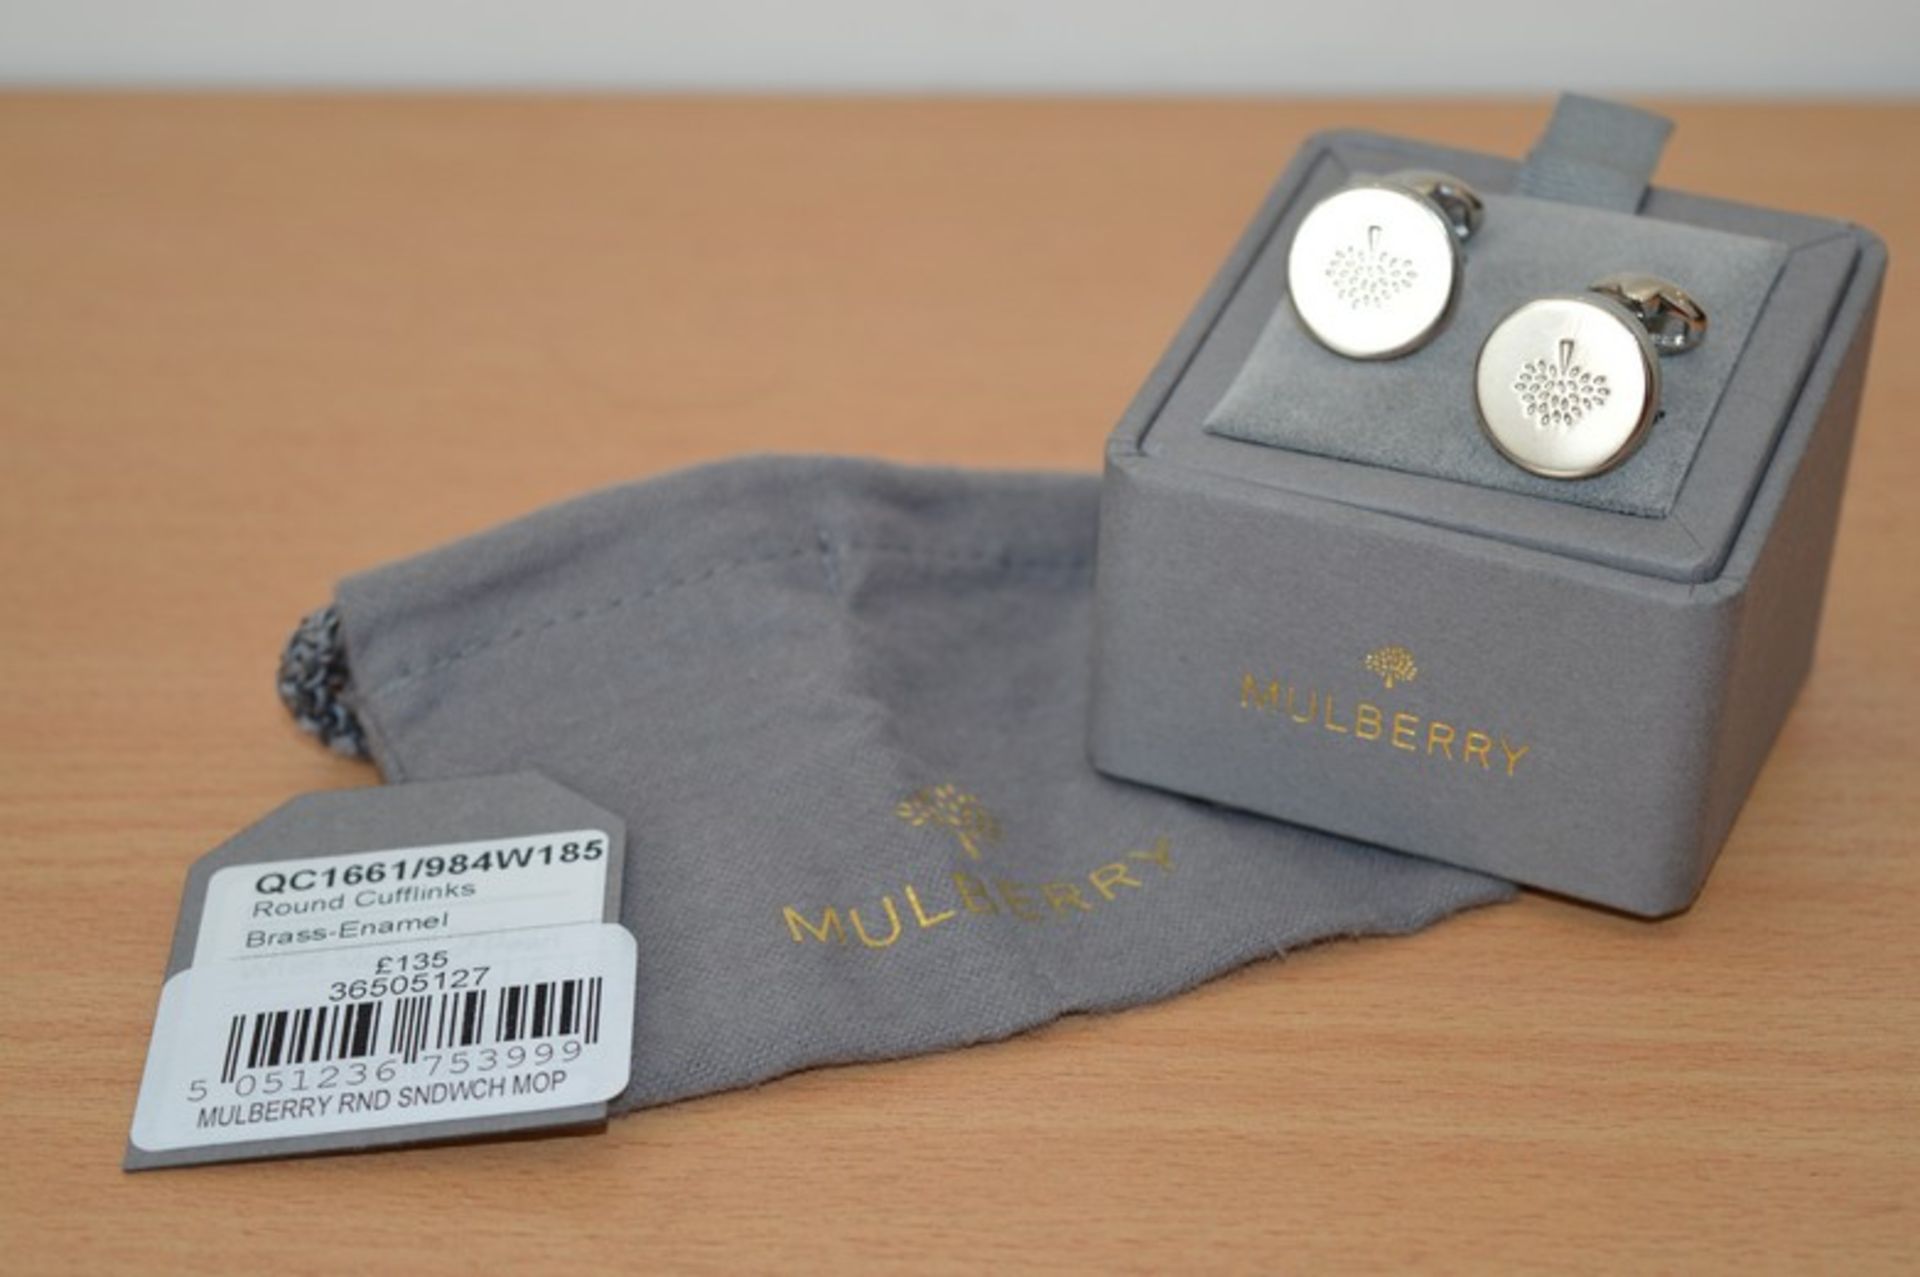 BOXED MULBERRY CHROME LOGO FRONT GENTS DESIGNER CUFFLINKS RRP £135 (BL553033))06.01.15)